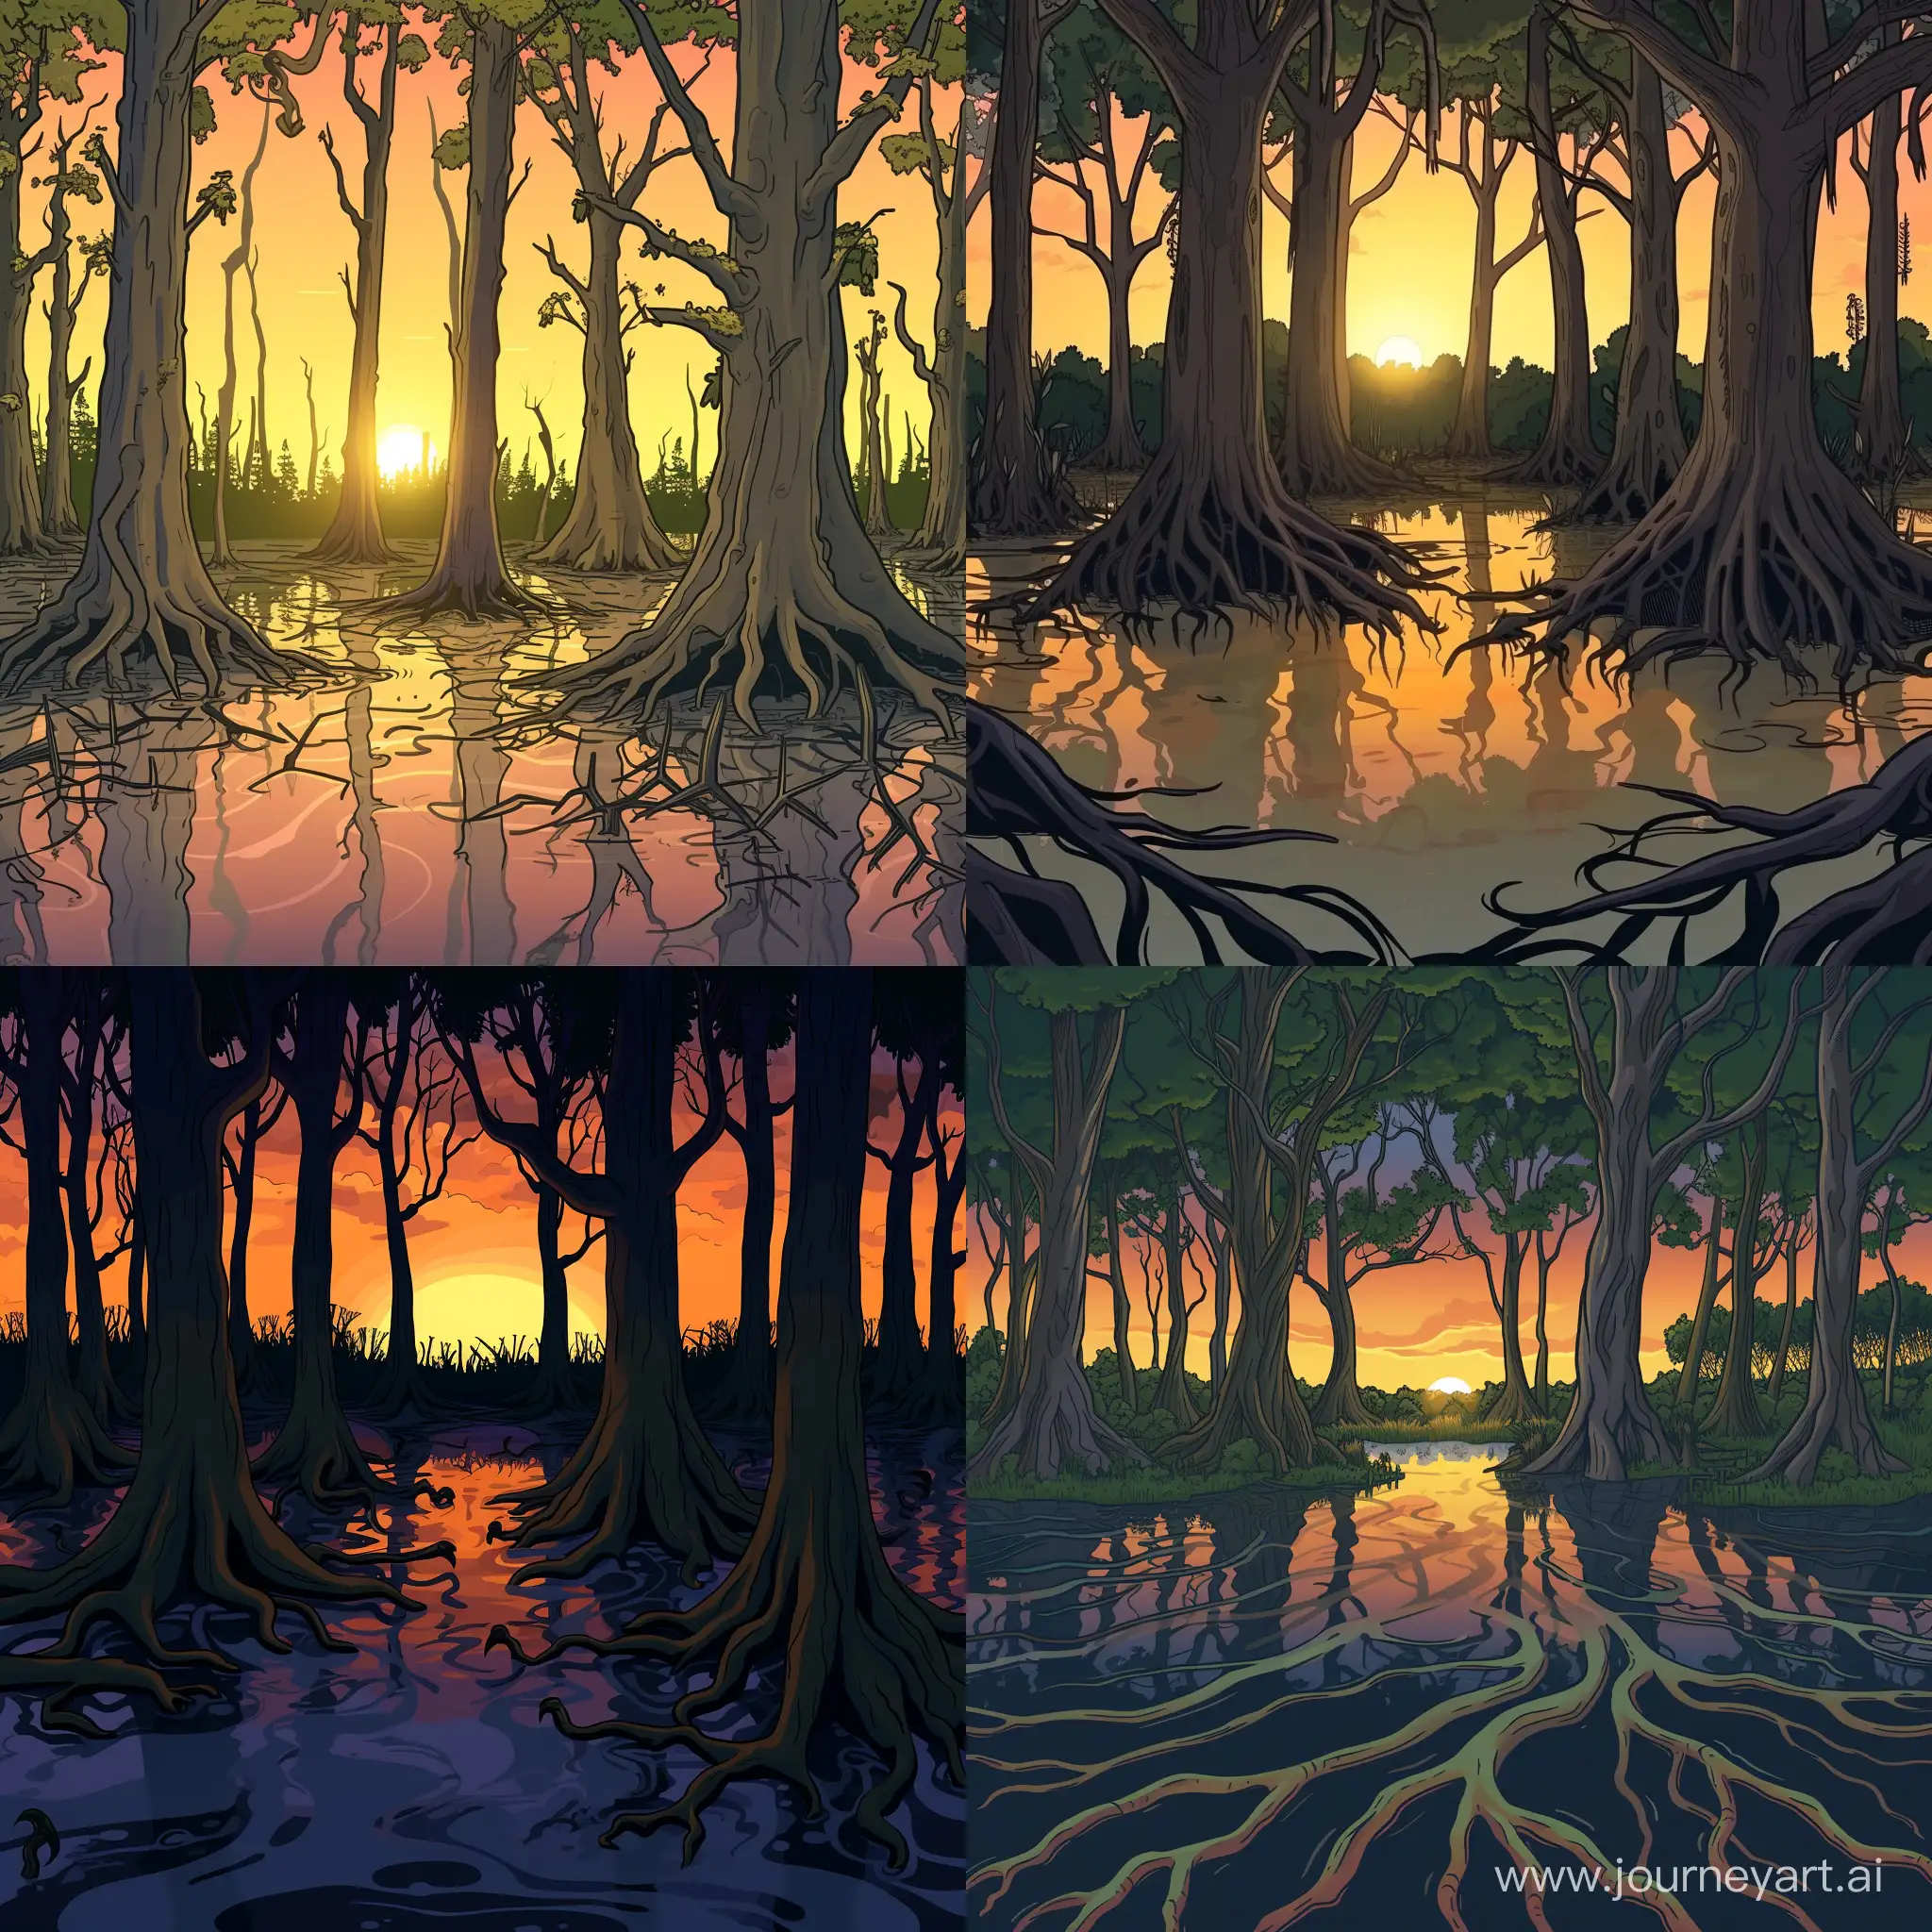 Enchanting-Cartoon-Sunset-in-a-Sunny-Swamp-Forest-with-Submerged-Tree-Roots